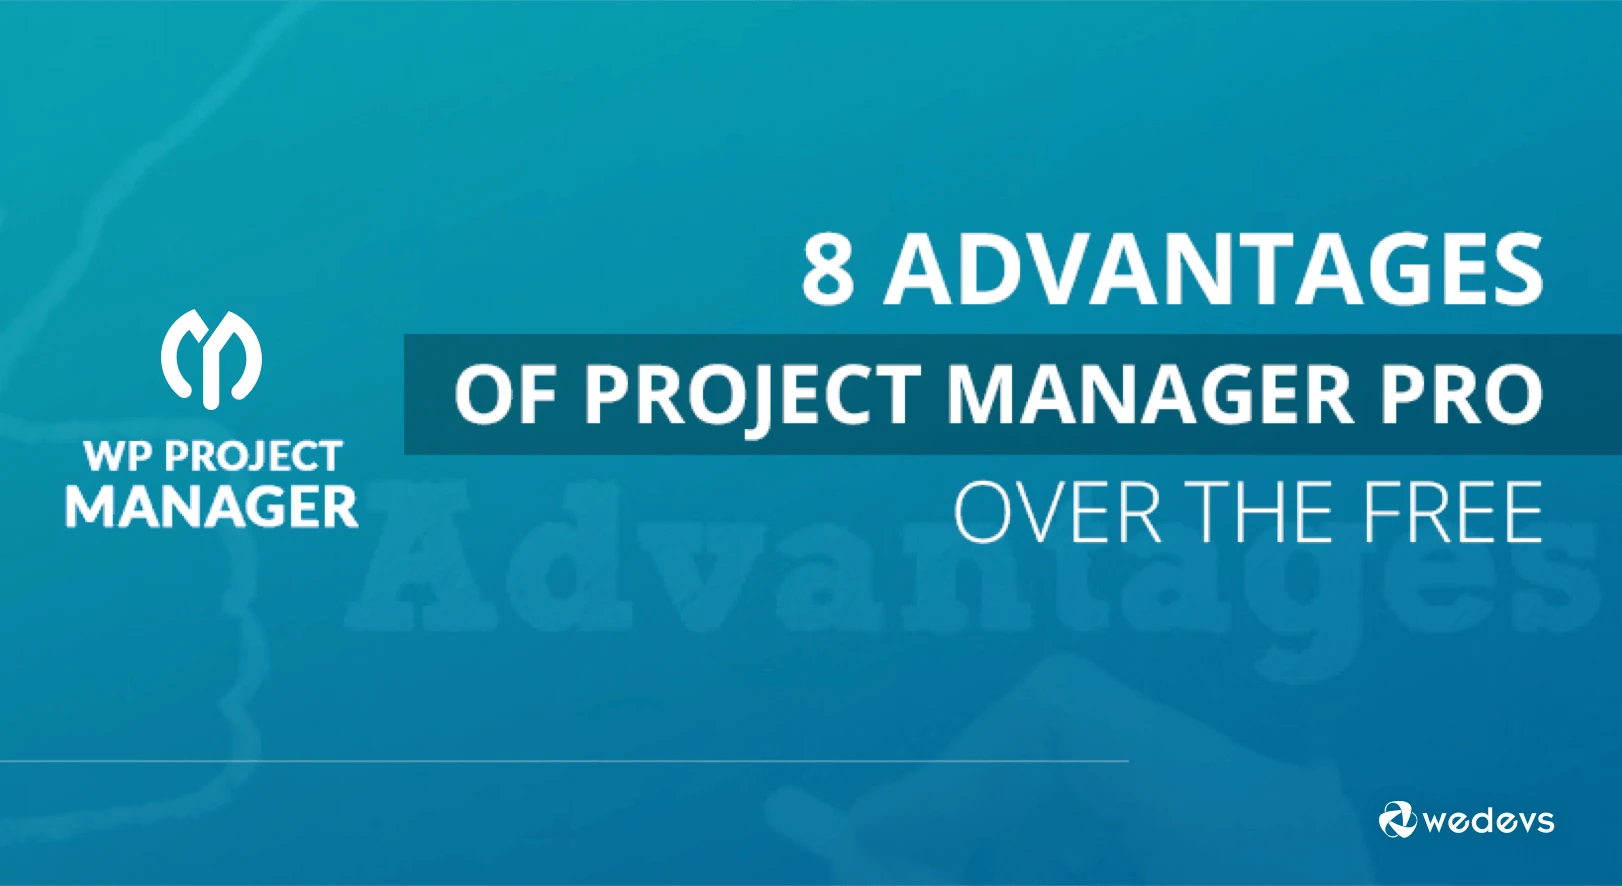 8 Advantages of Project Manager Pro over the Free